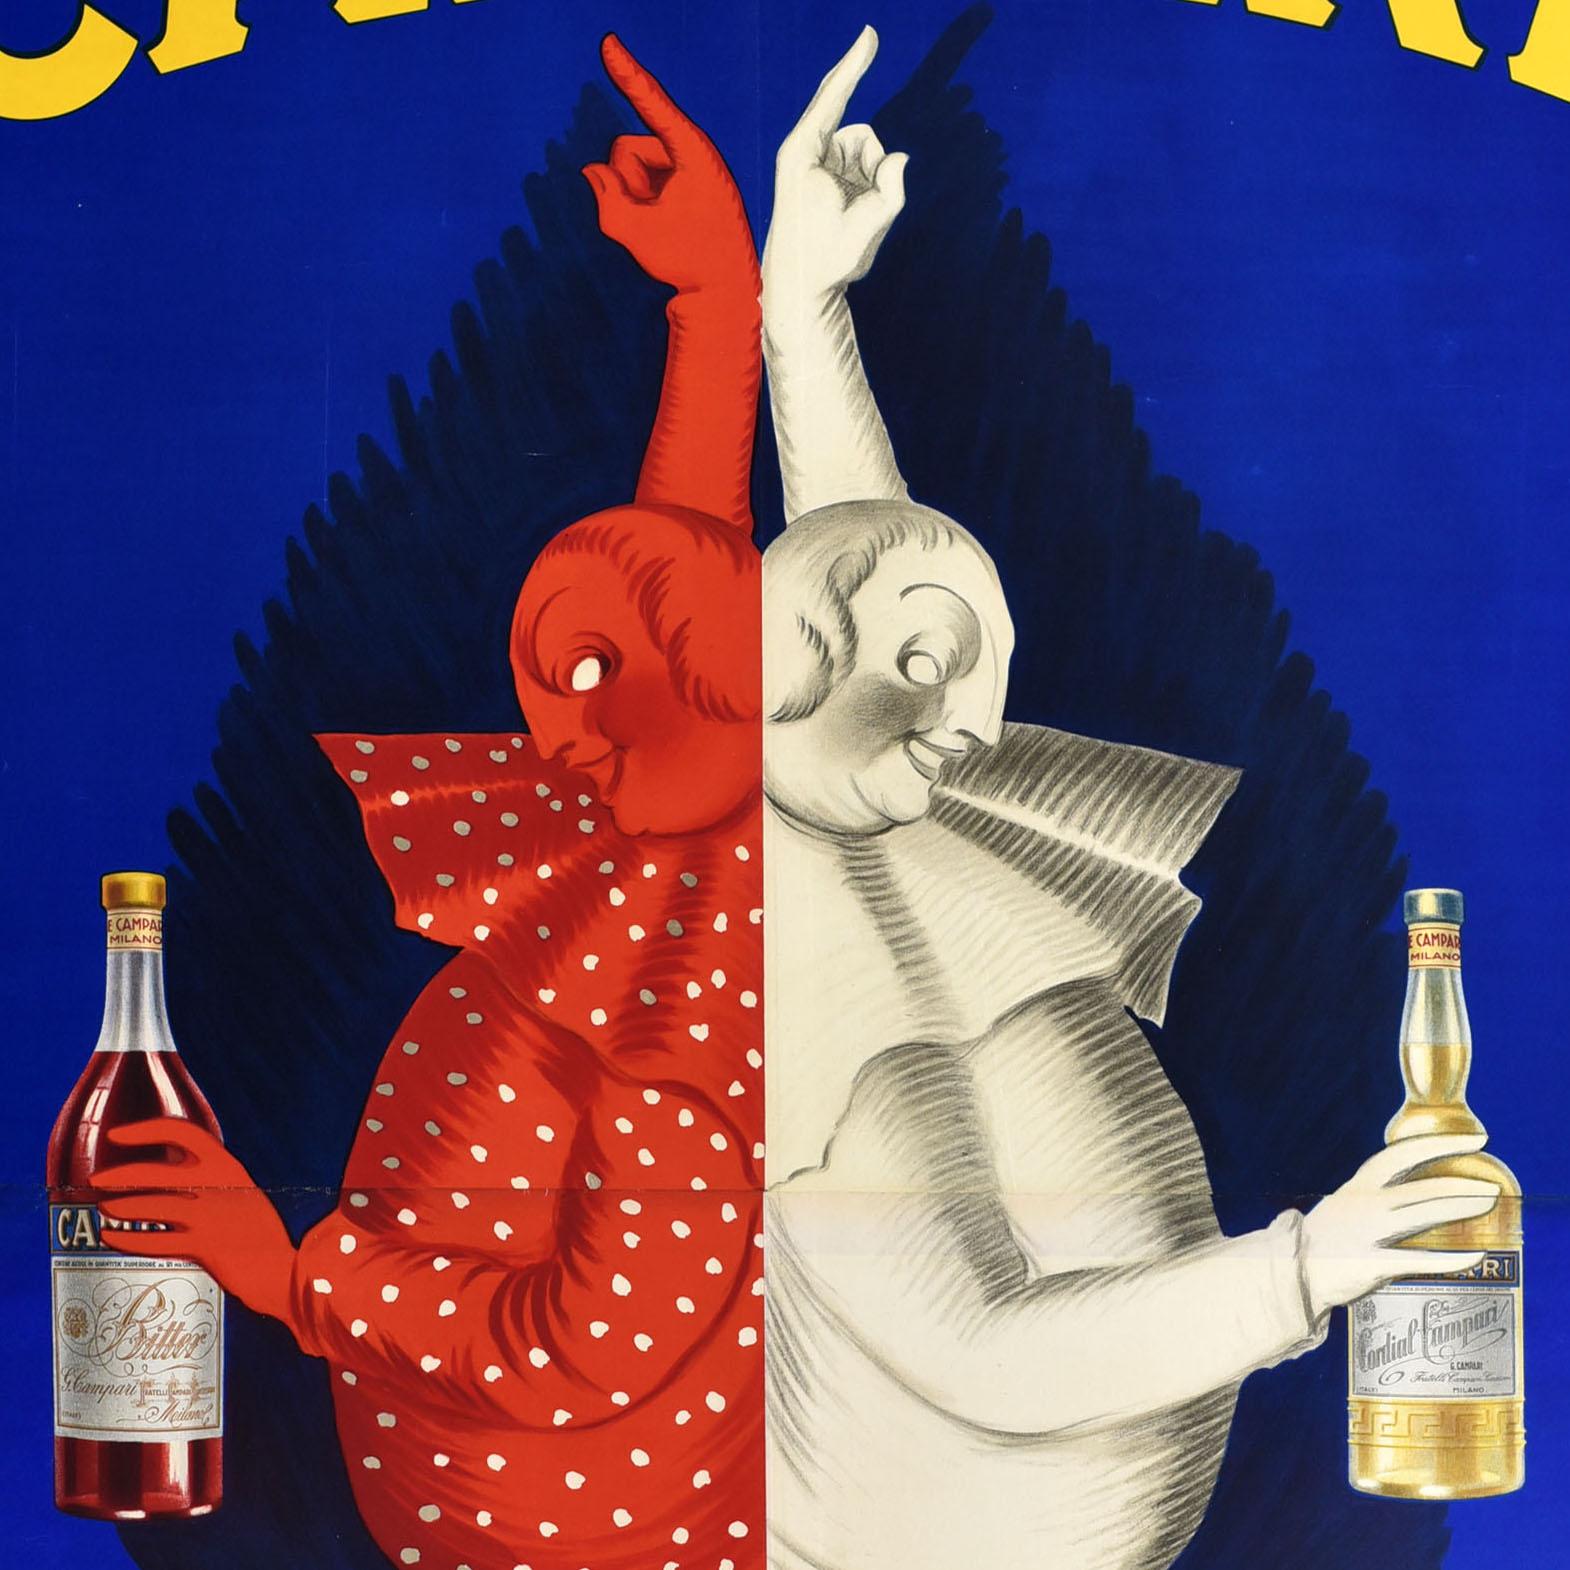 Original vintage drink advertising poster by the renowned poster artist Leonetto Cappiello (1875-1942) for the Italian alcoholic aperitif drink 